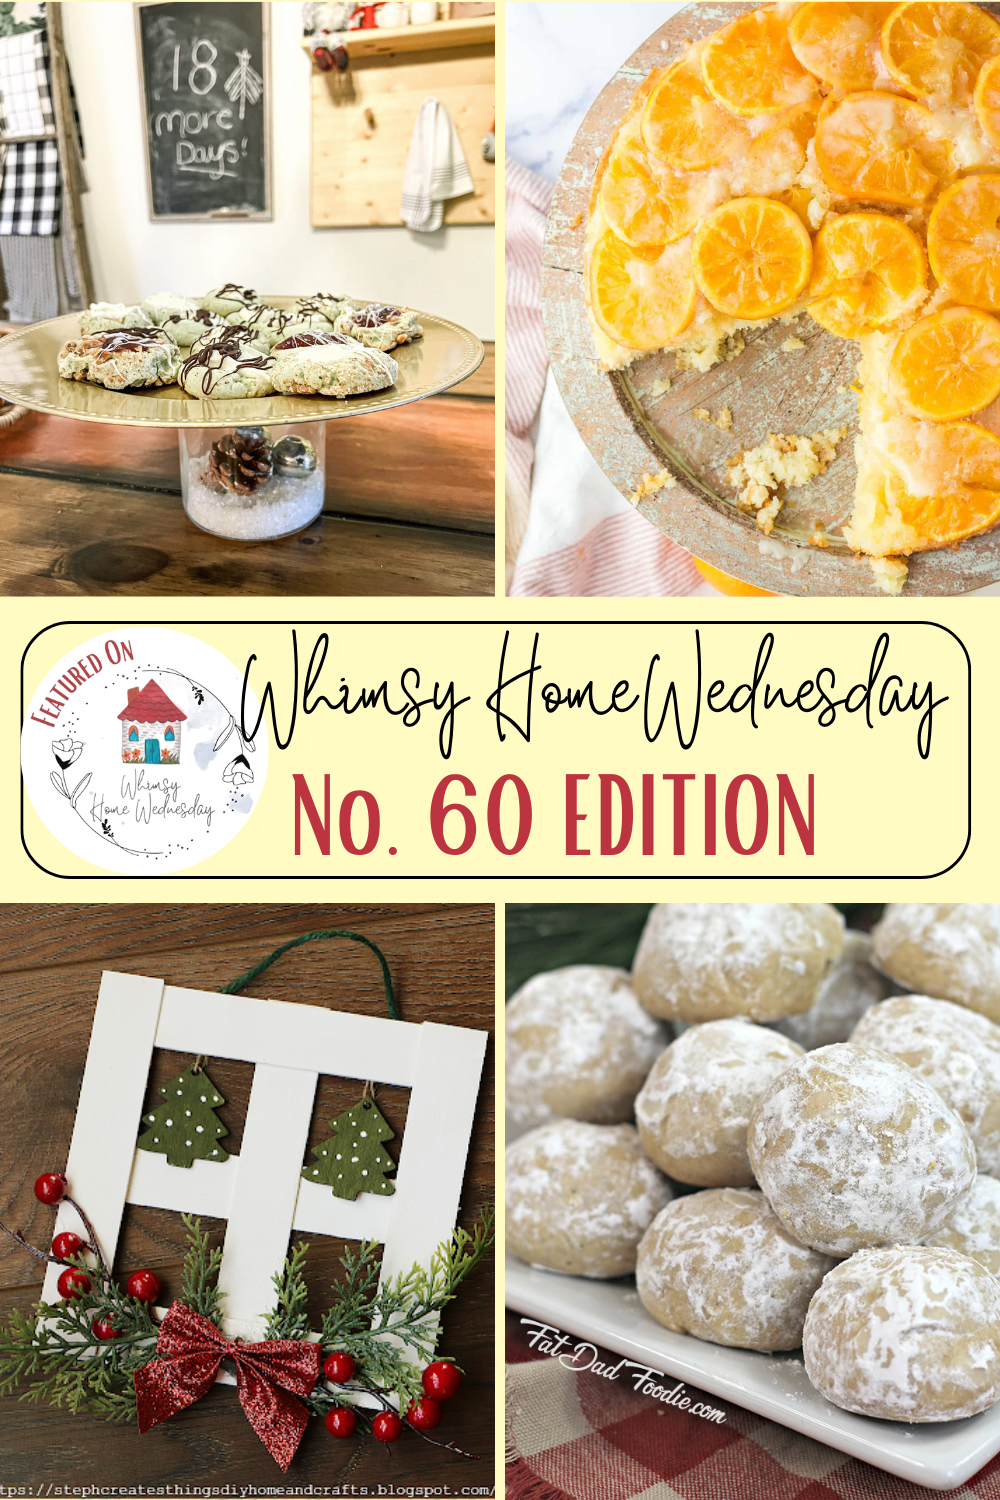 Join us on Whimsy Home Wednesday Blog Link Party No. 60 and see host projects, the features from the previous week and link up your posts!